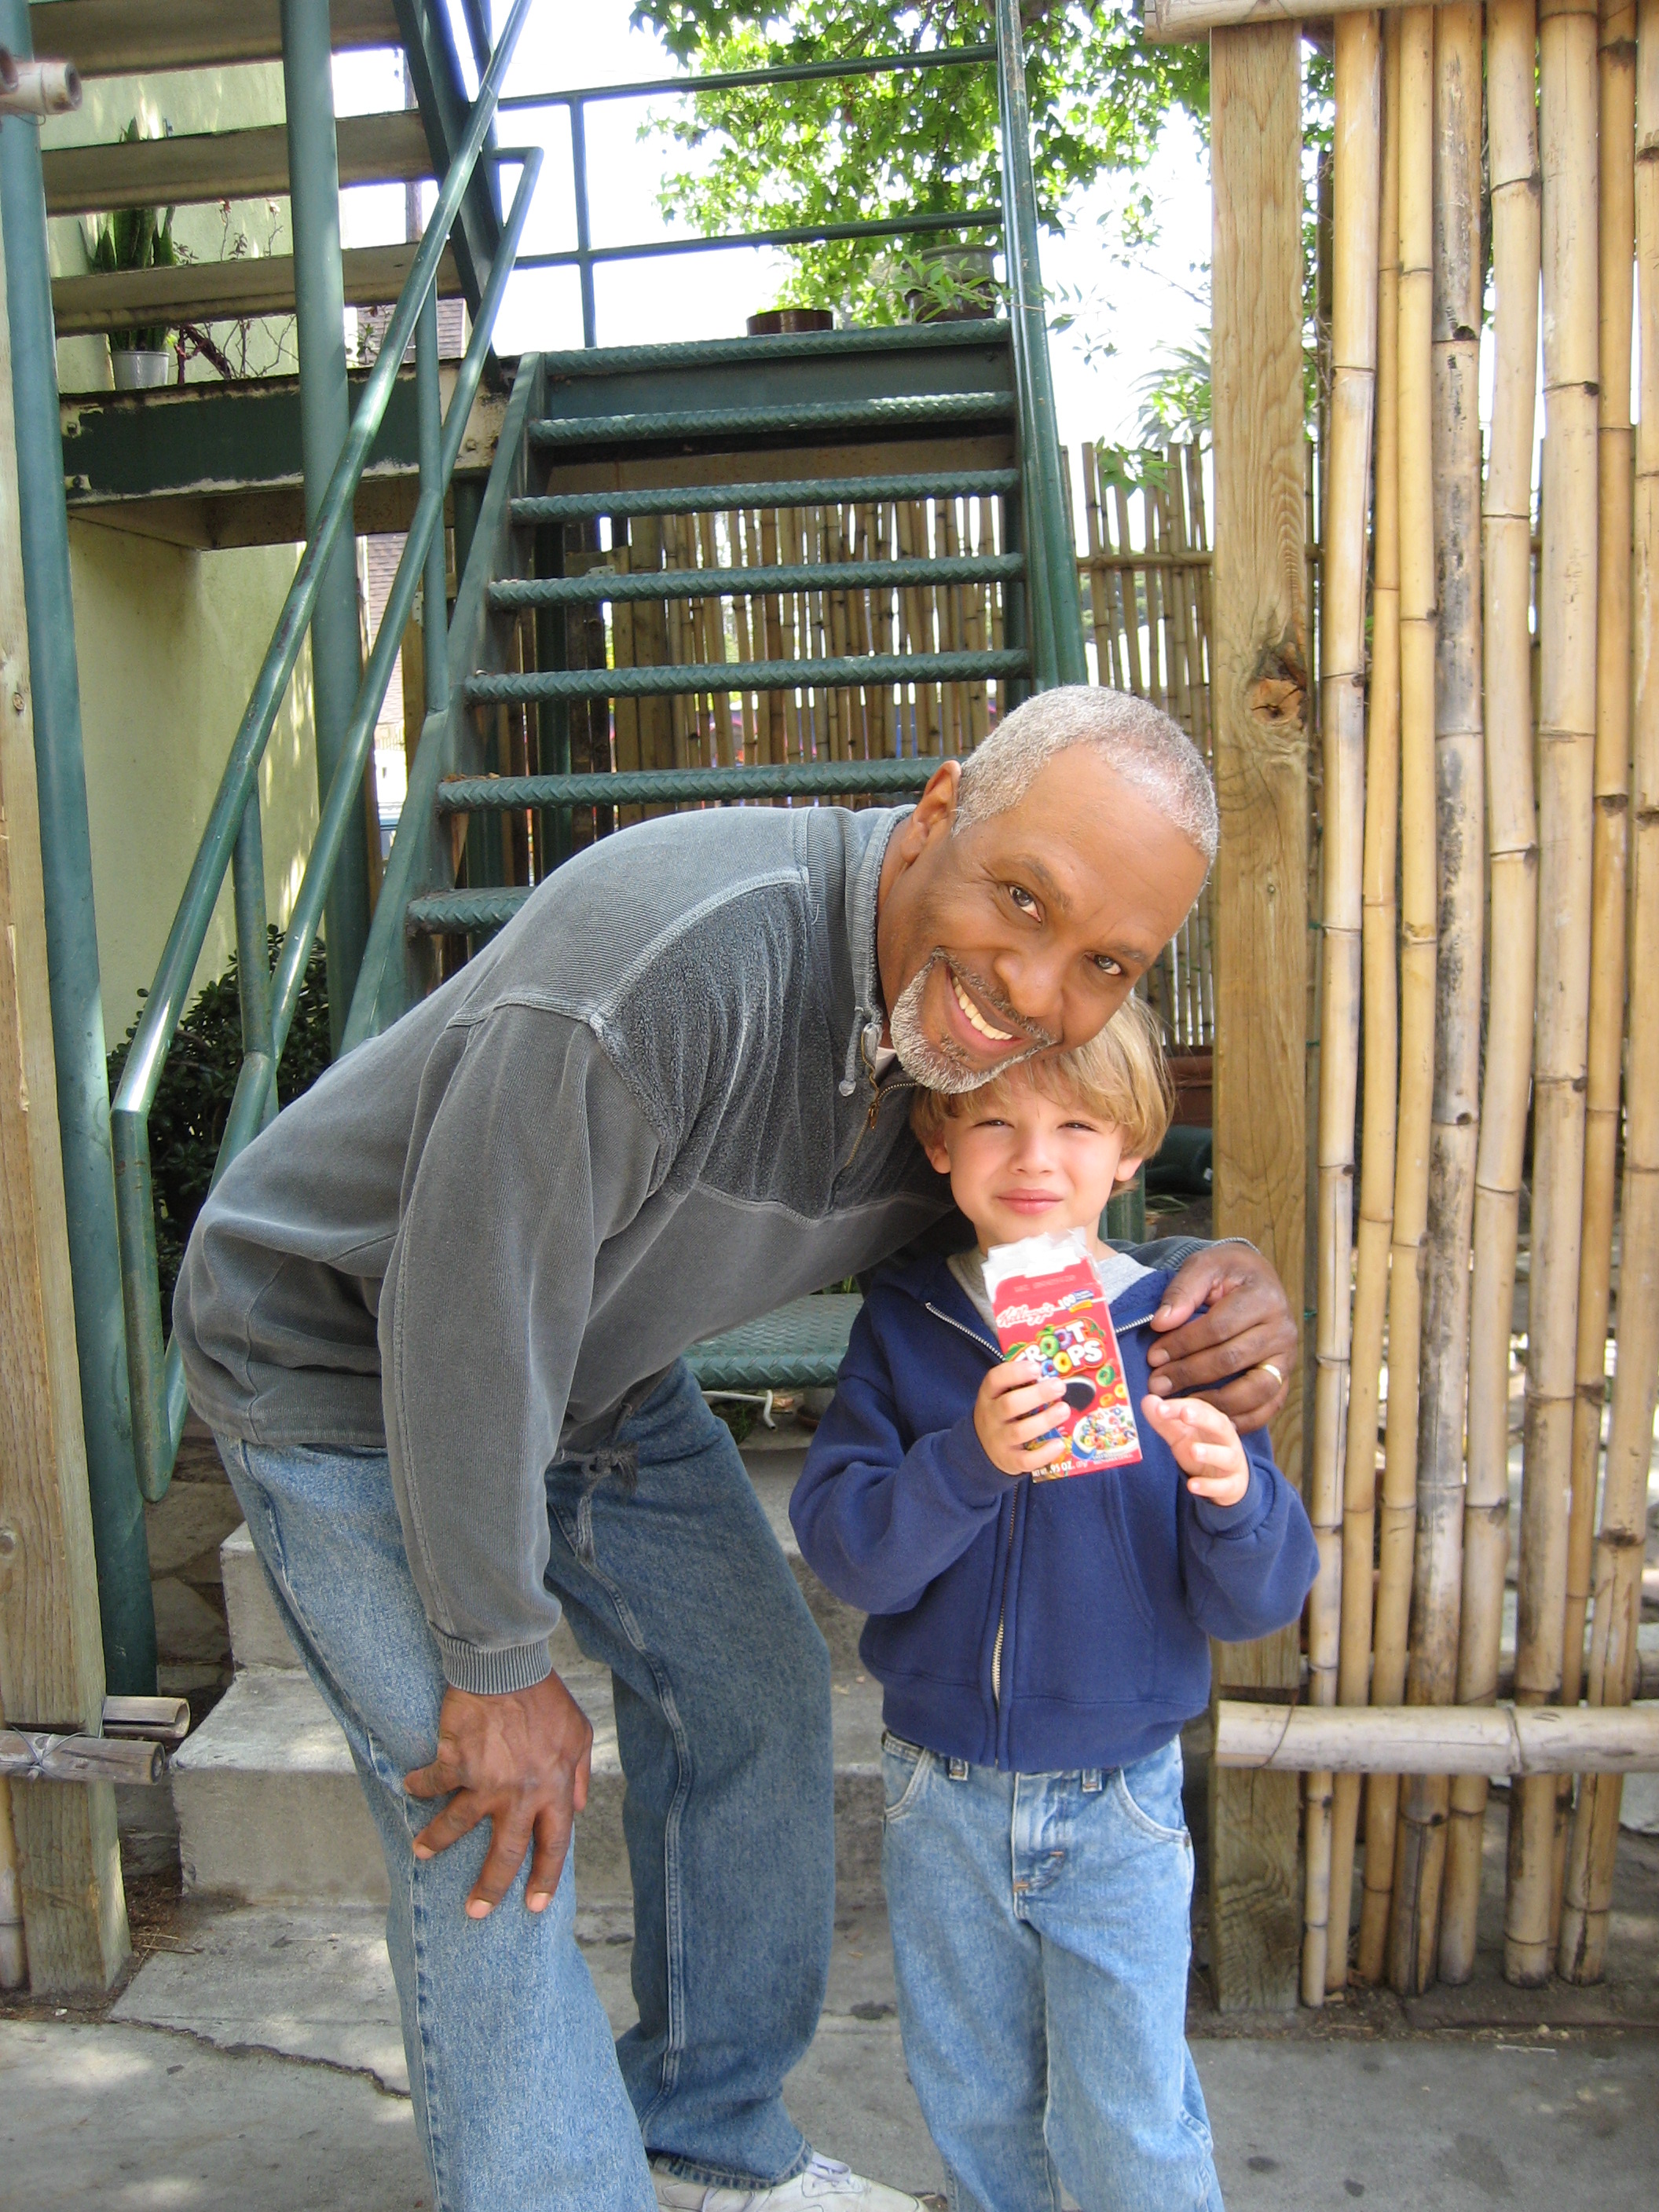 Max with Mr. James Pickens, Jr., taken during BALL DON'T LIE shoot